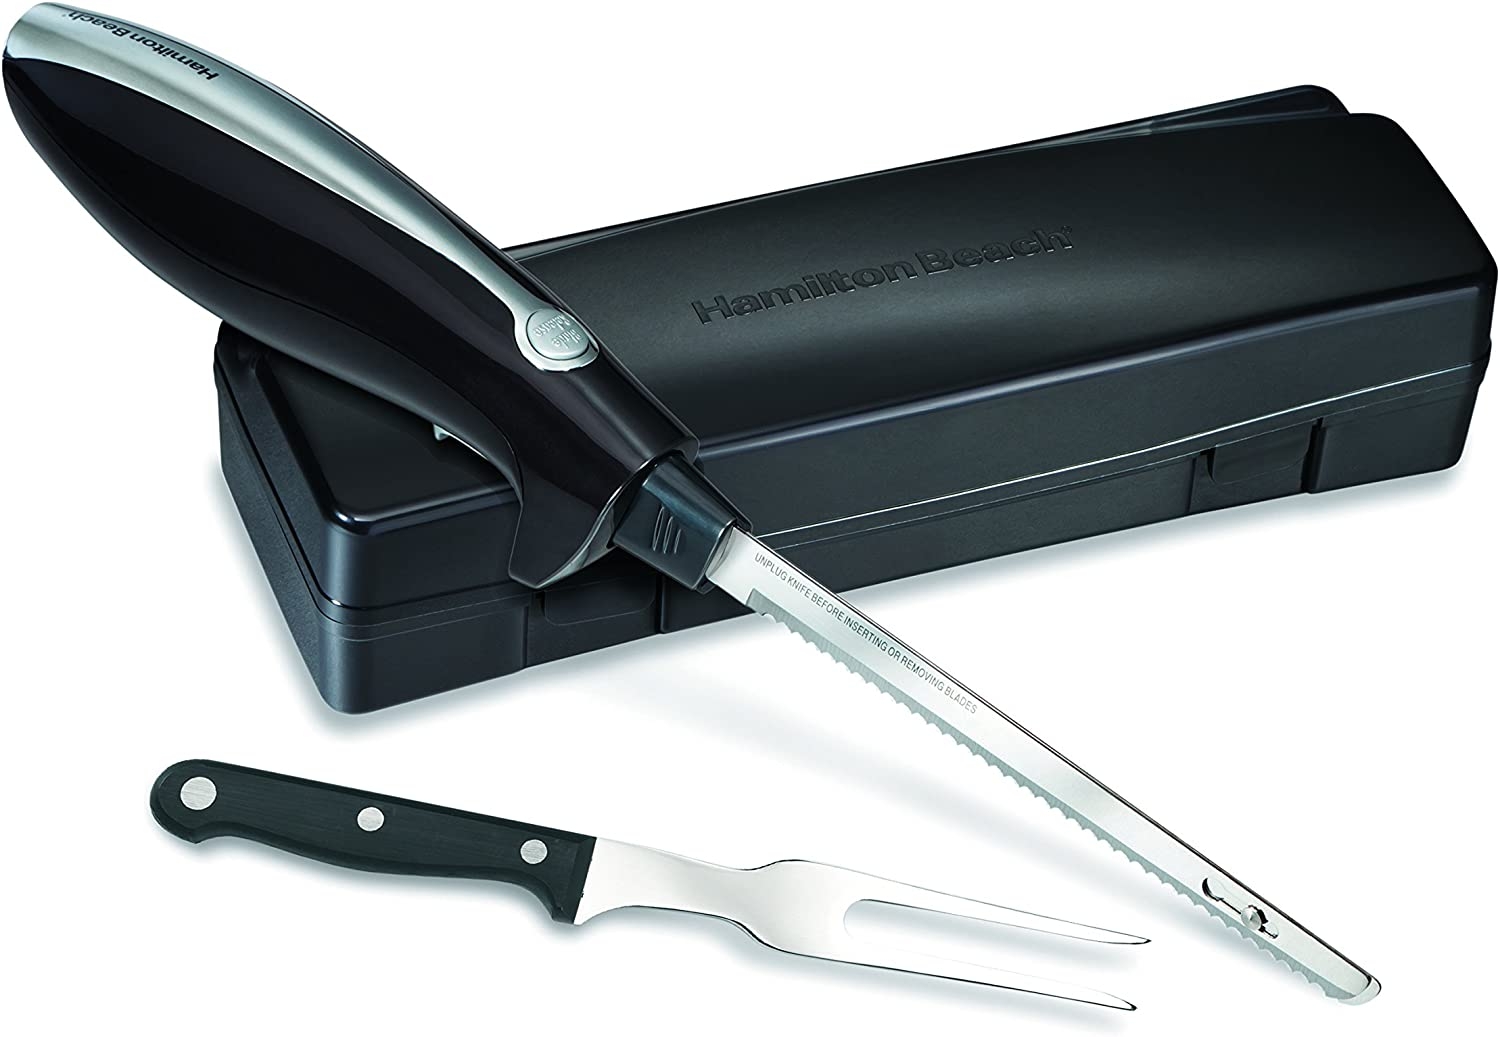 Hamilton Beach Set Electric Carving Knife for Meats, Poultry, Bread, Crafting Foam and More, Storage Case and Serving Fork